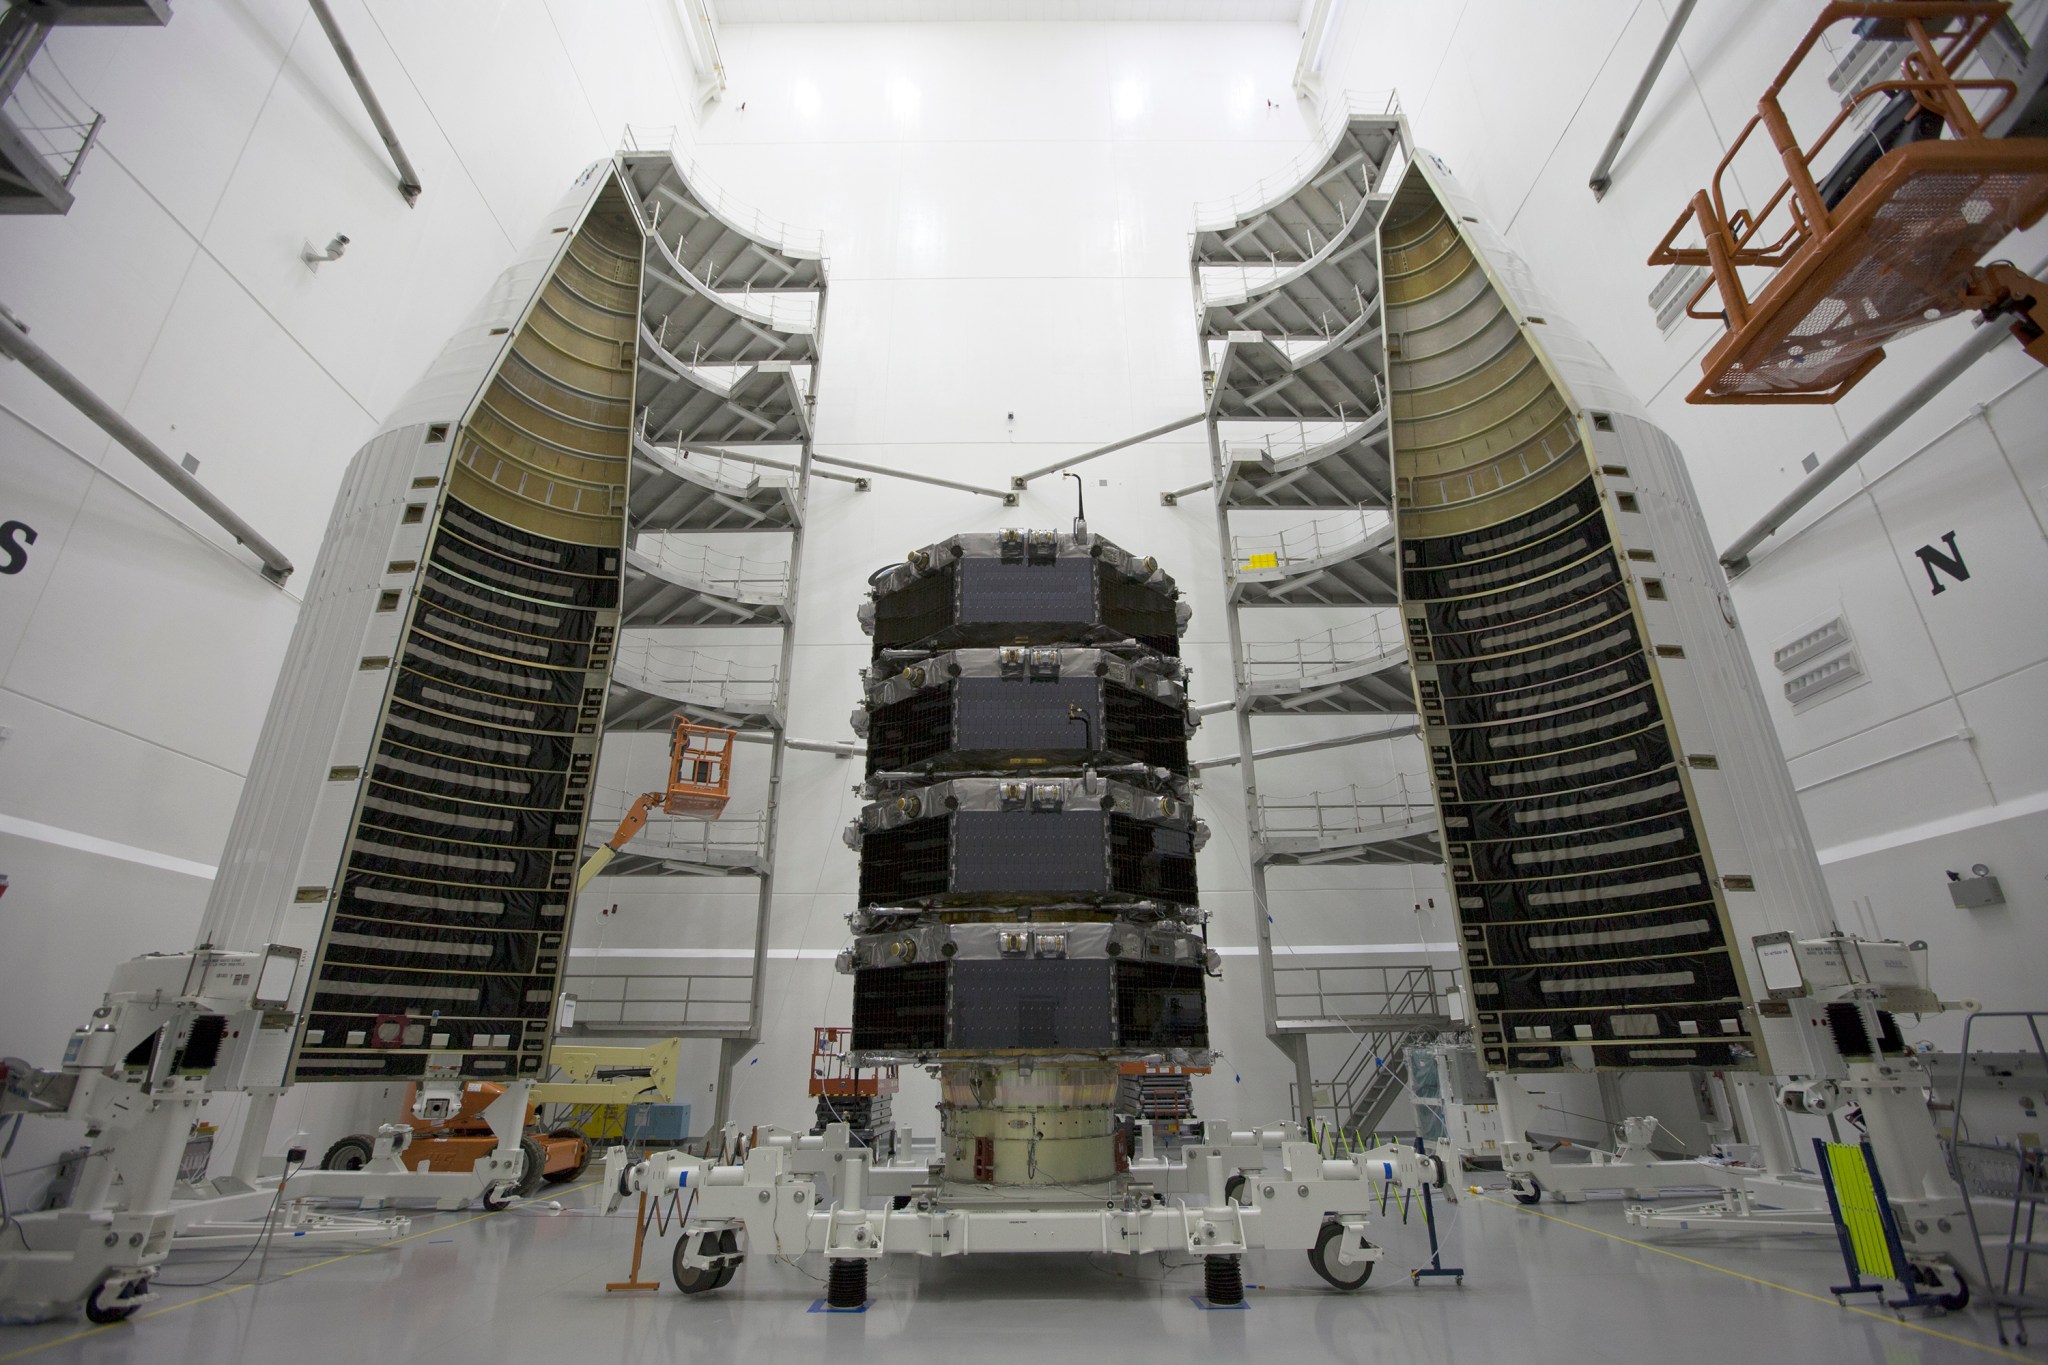 MMS spacecraft in processing